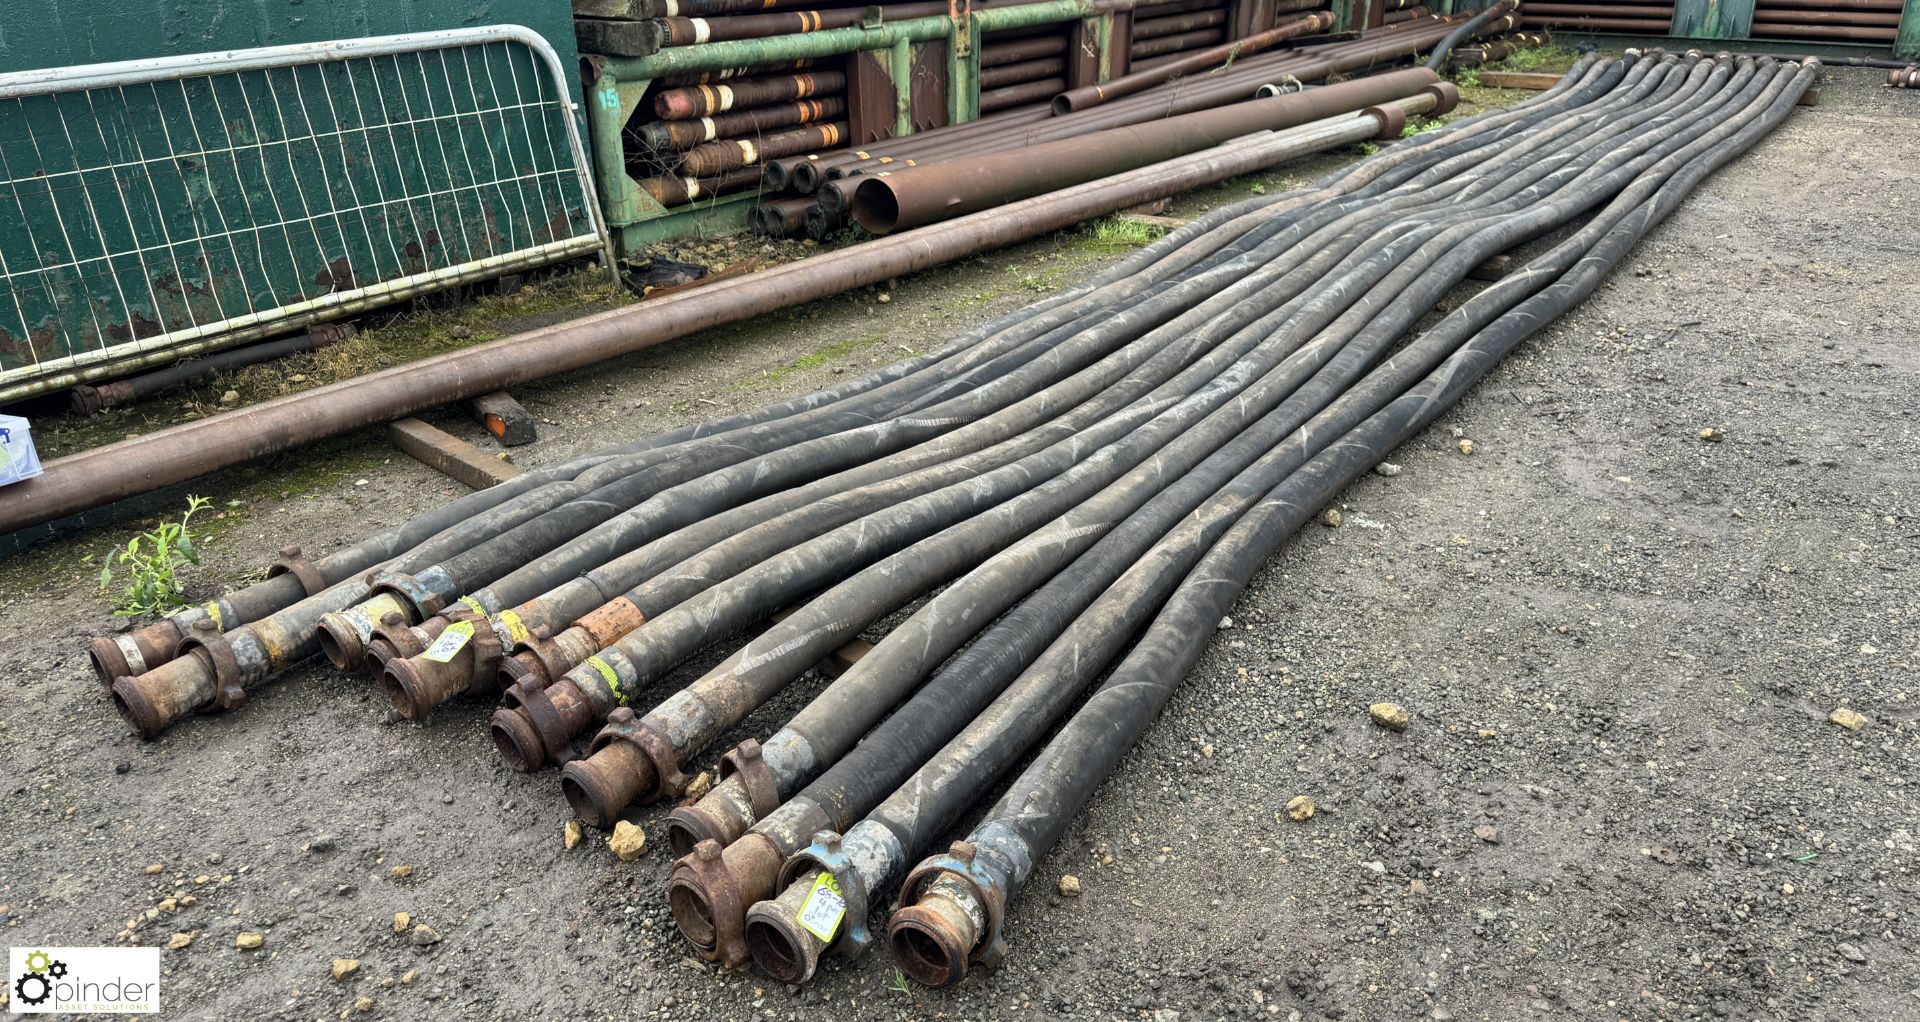 4 IVG Flexible Hoses, FH10-10bar, 4in, 12m long, with Anson FIG 206 union (knock up) (LOCATION: - Image 2 of 6